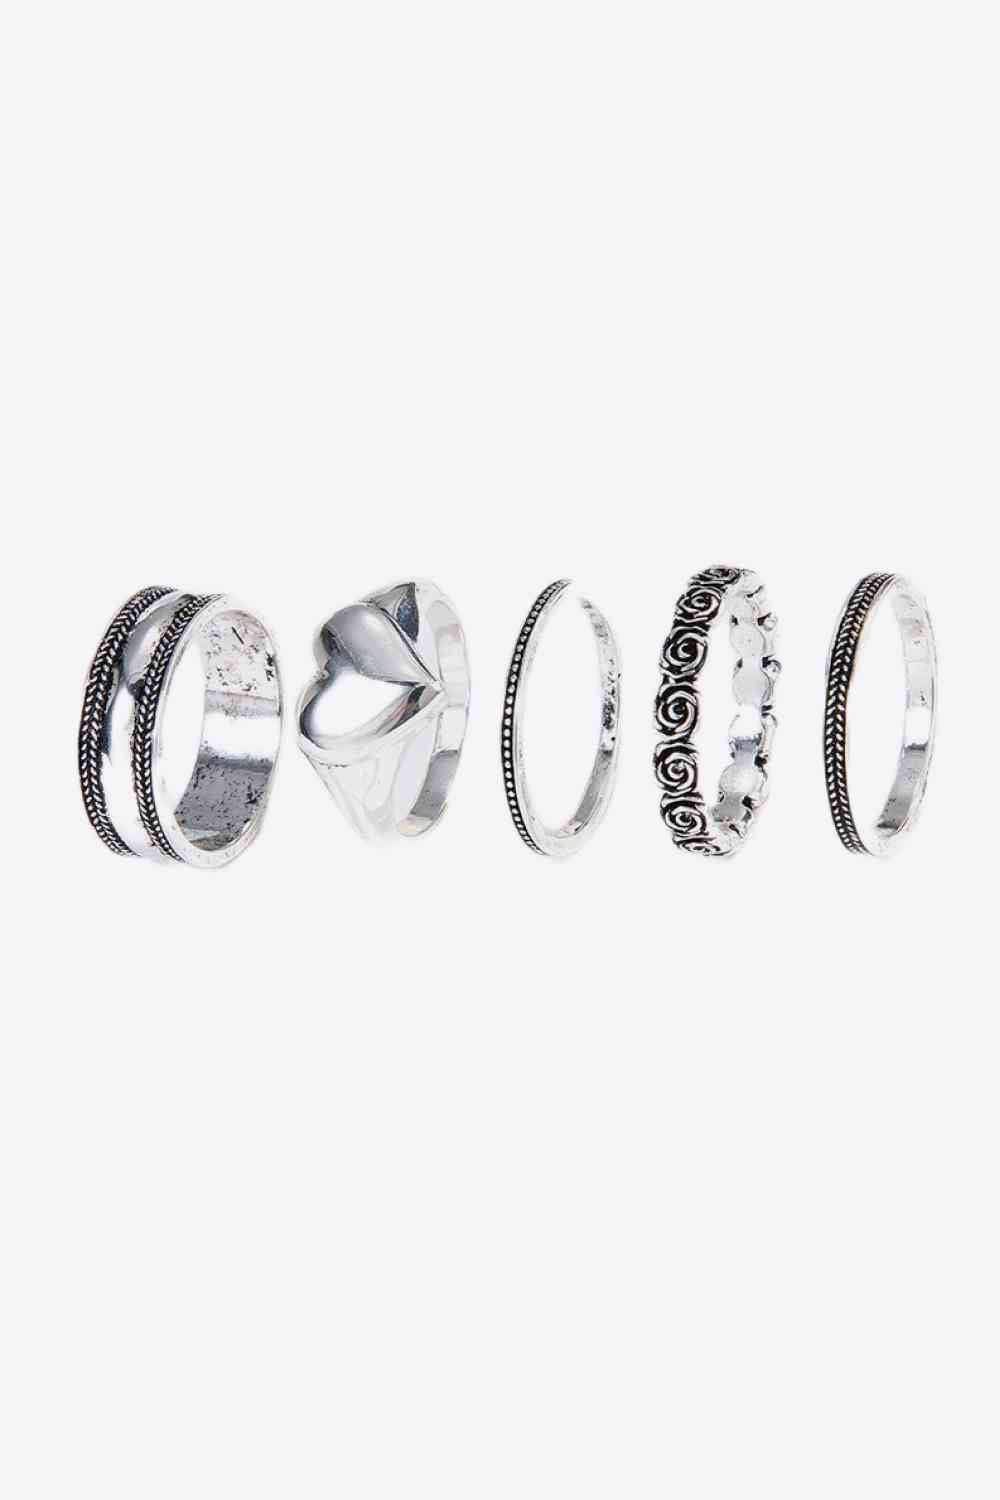 Zinc Alloy Five-Piece Ring Set - God's Girl Gifts And Apparel